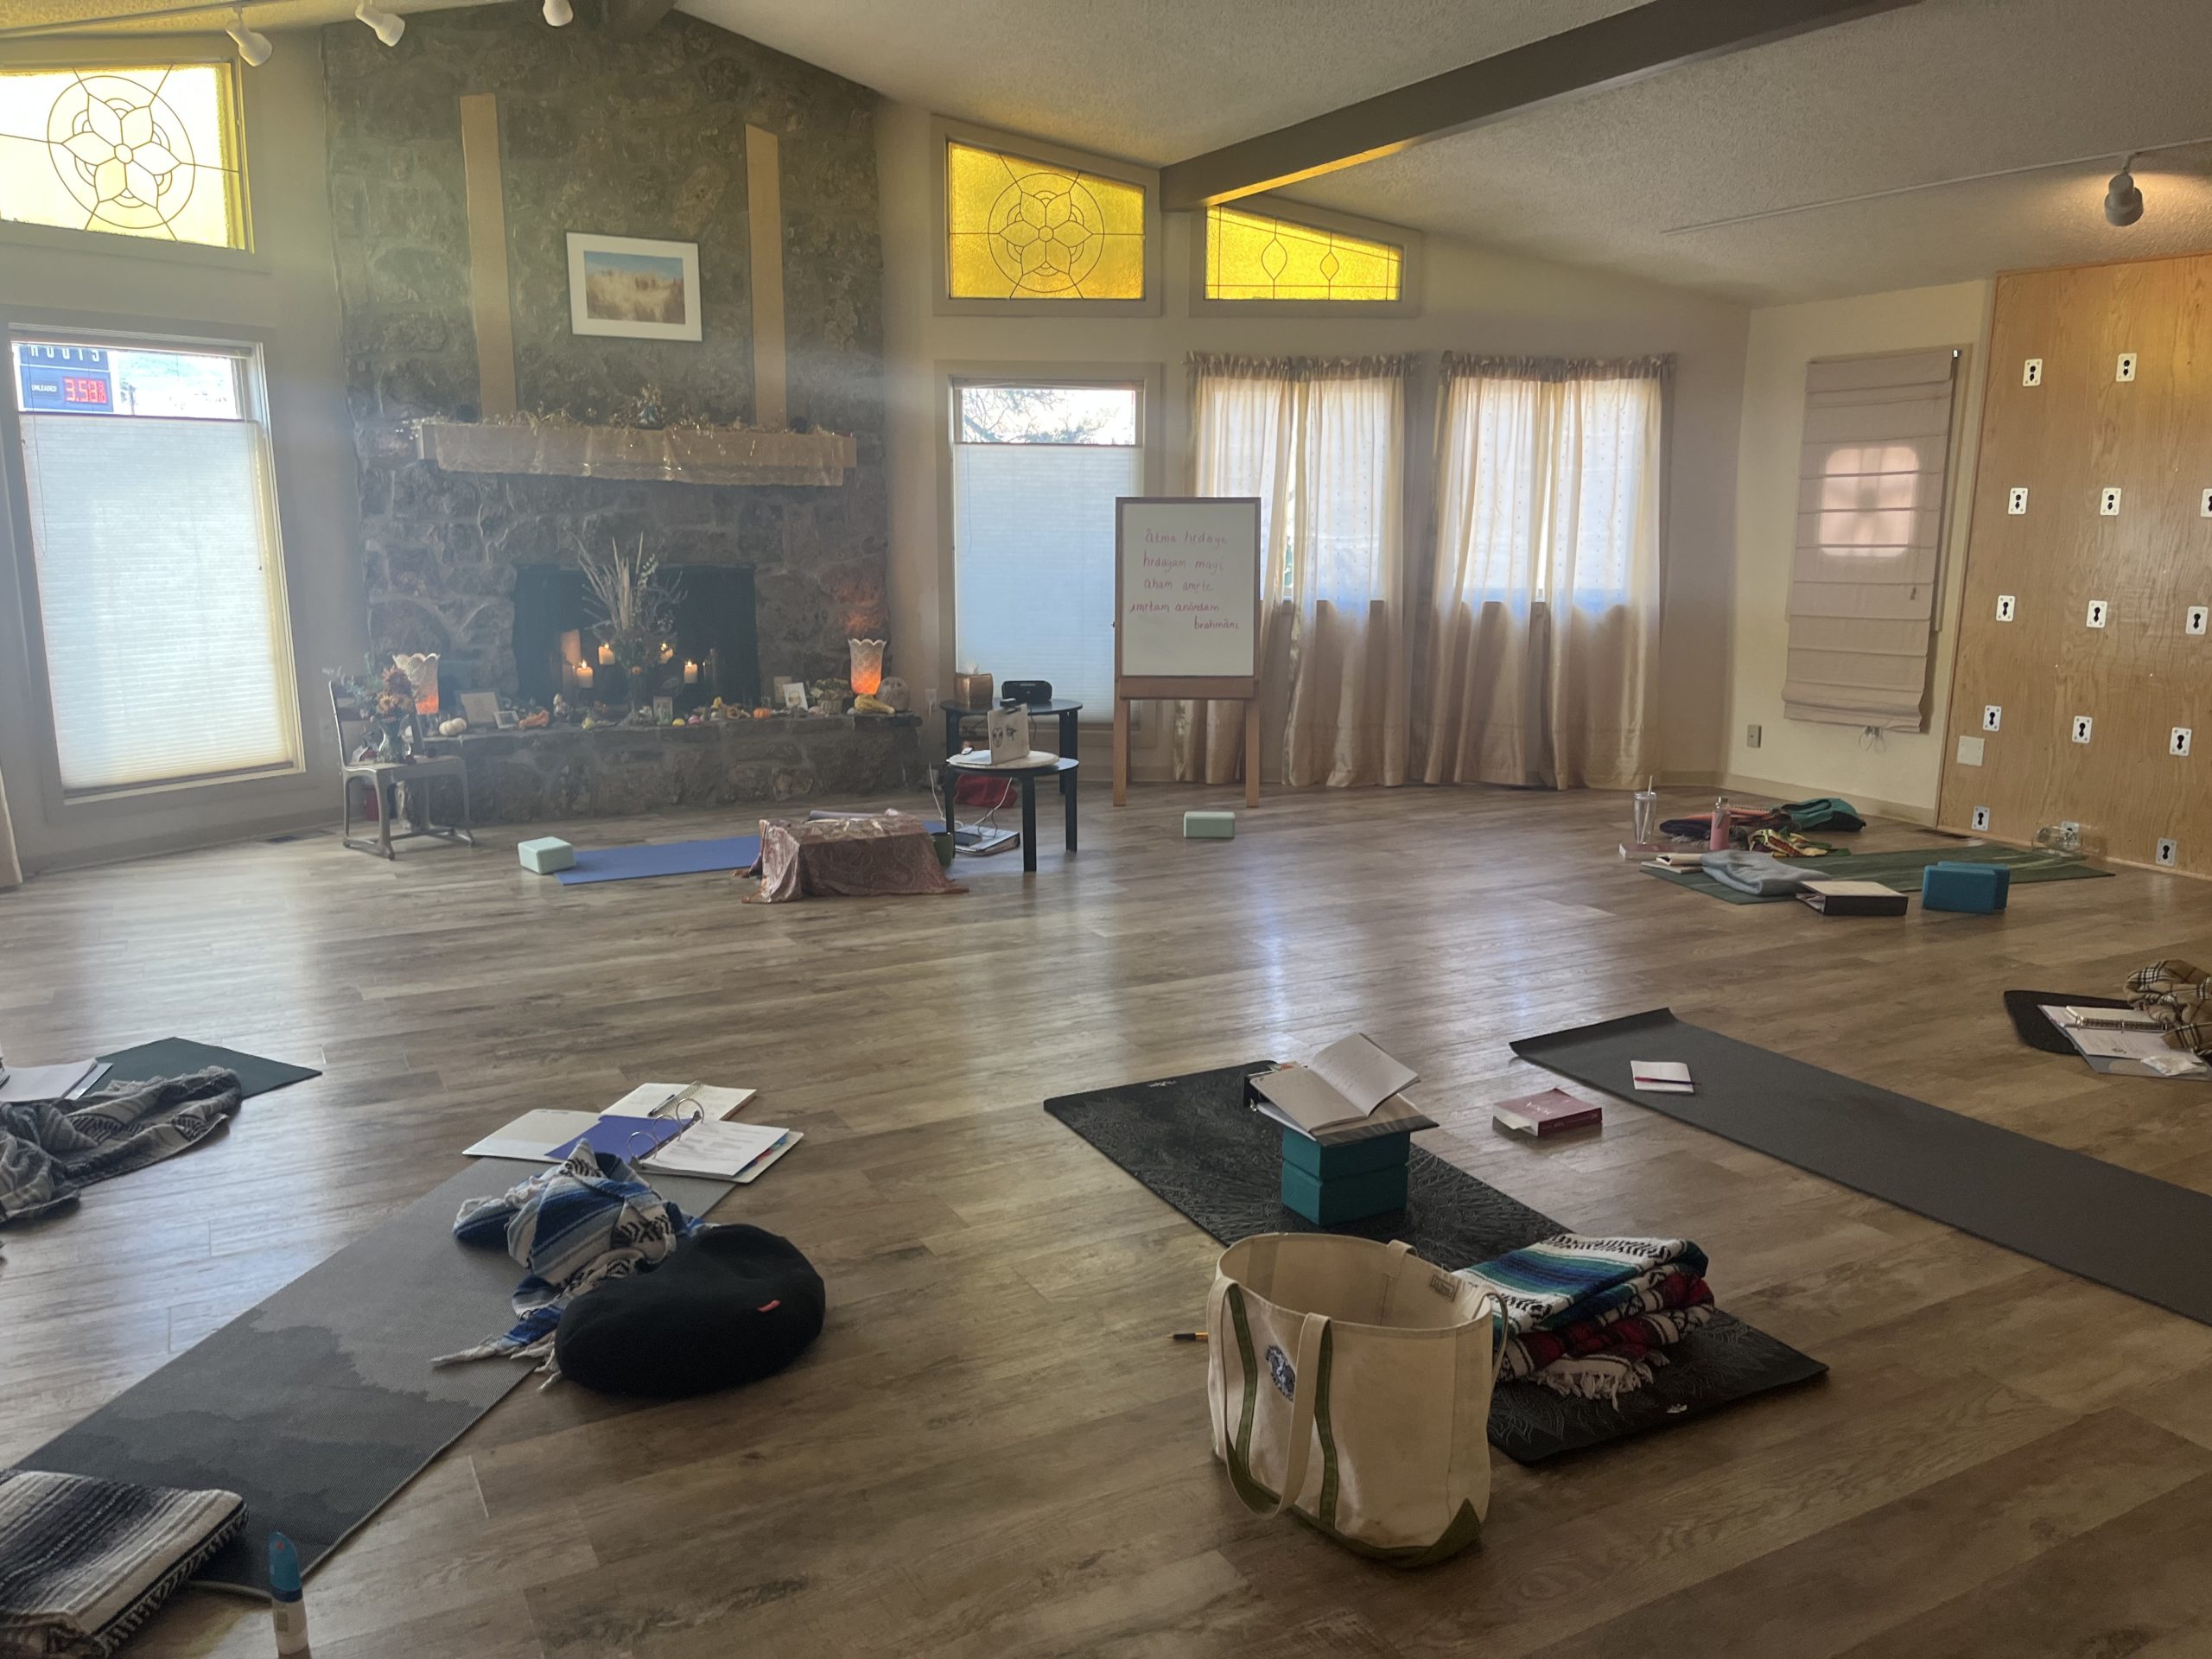 yoga studio with mats laid out on the floor